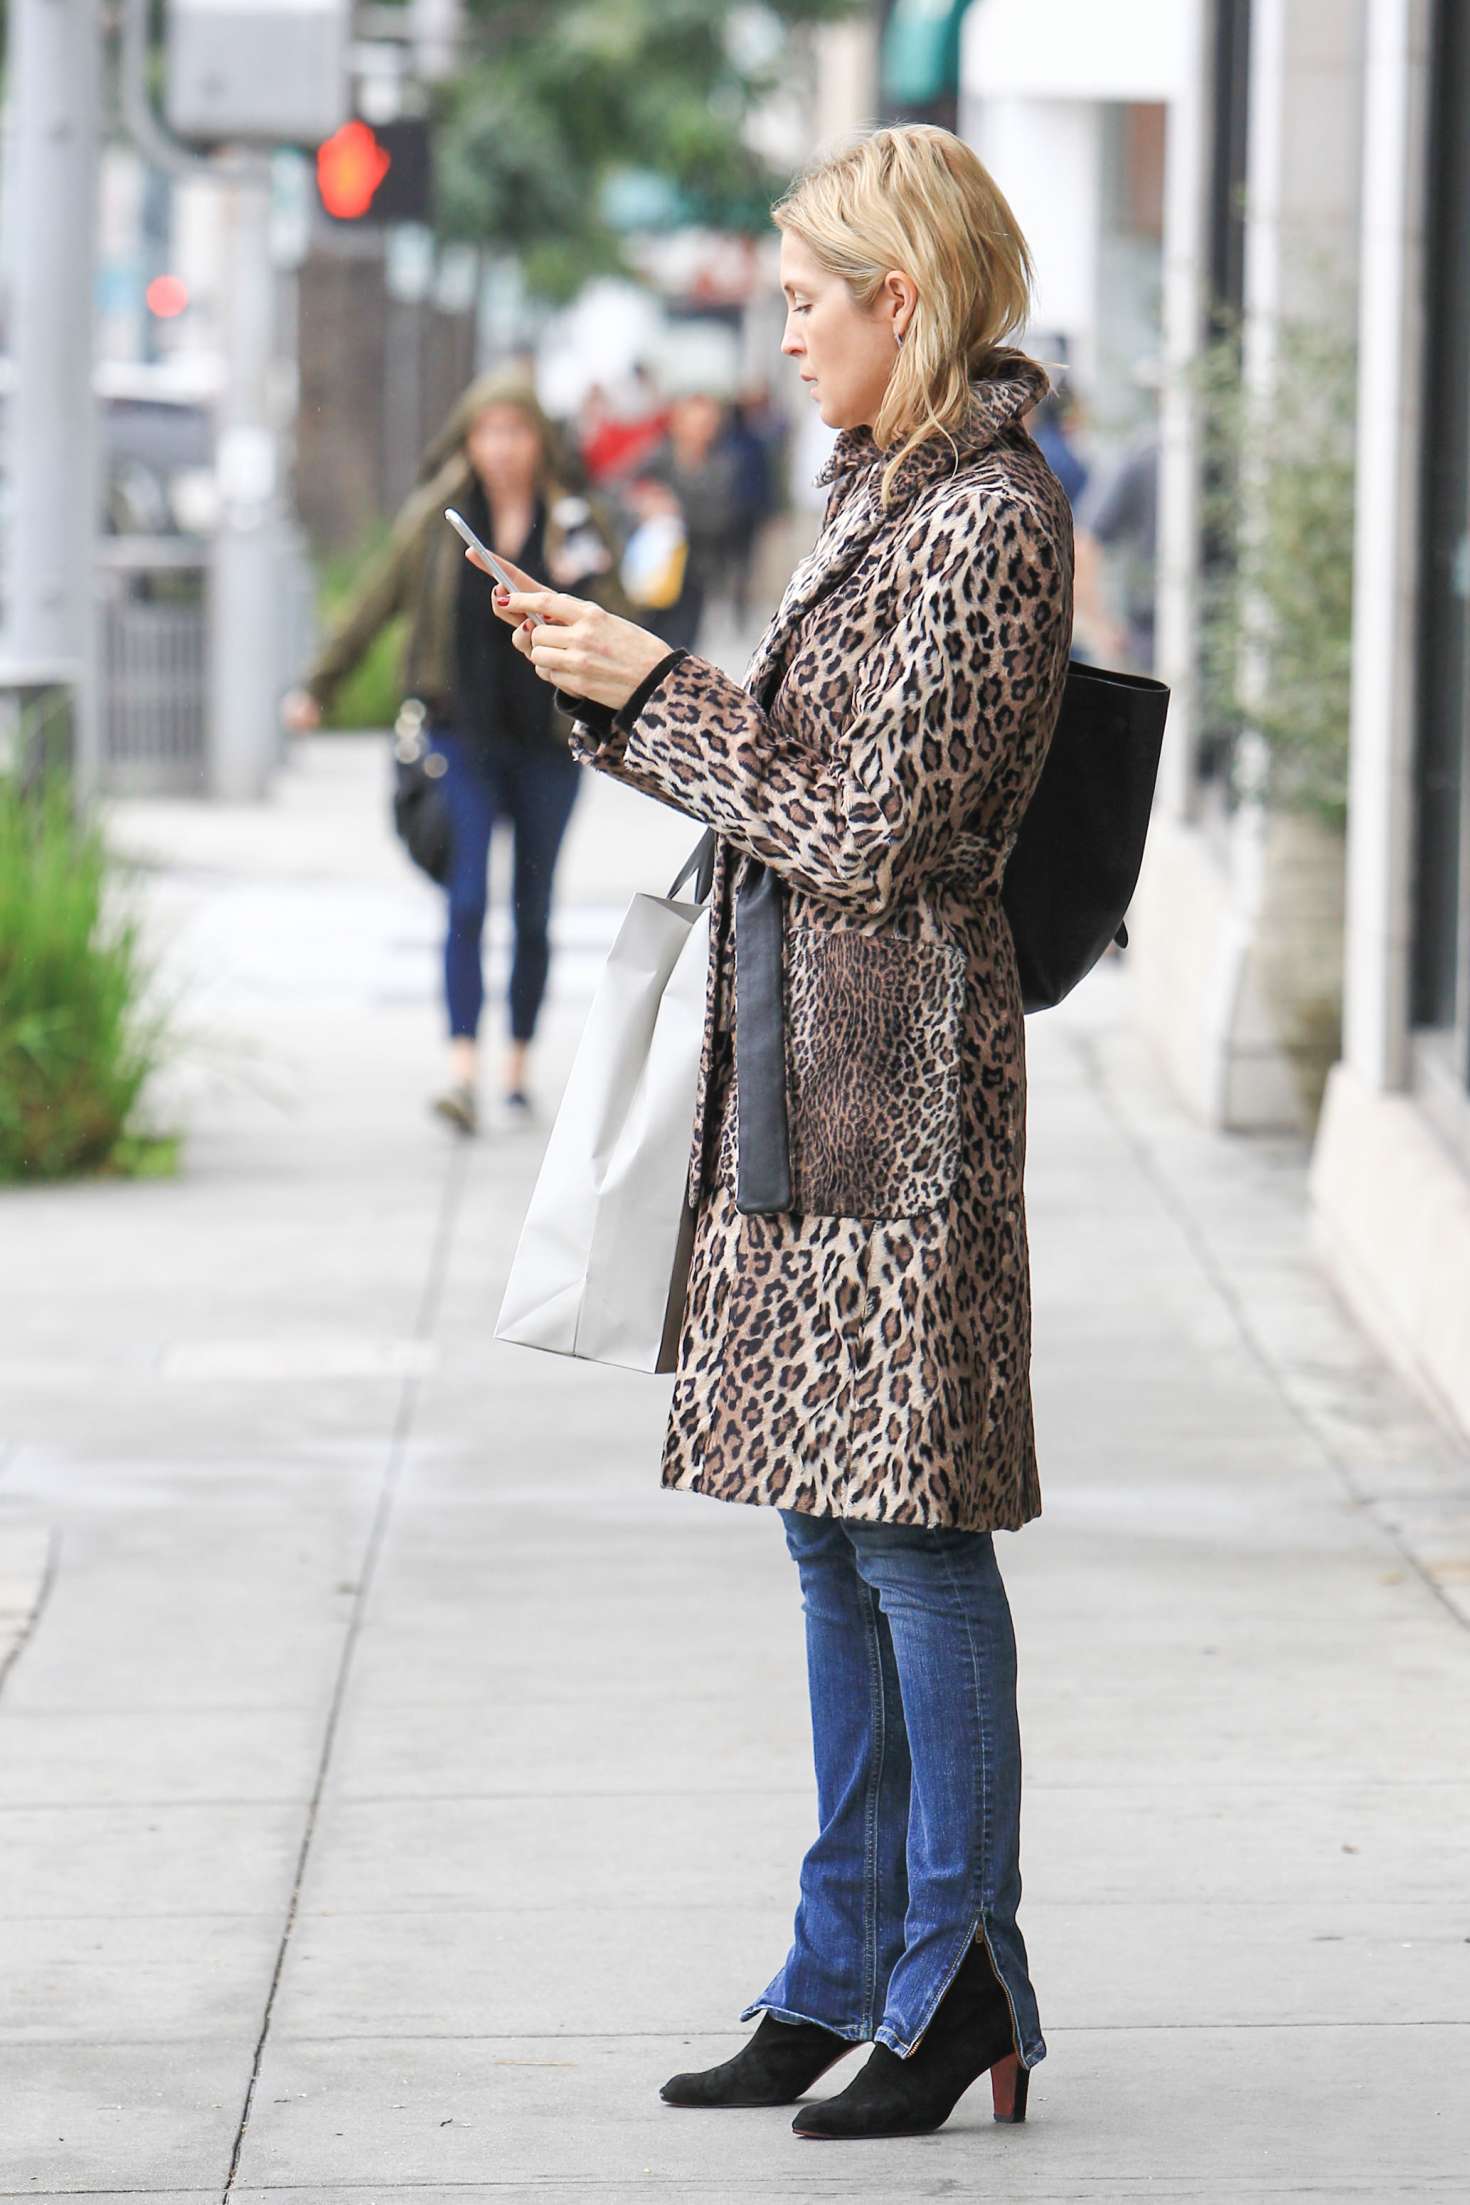 Kelly Rutherford 2017 : Kelly Rutherford out in Los Angeles -05